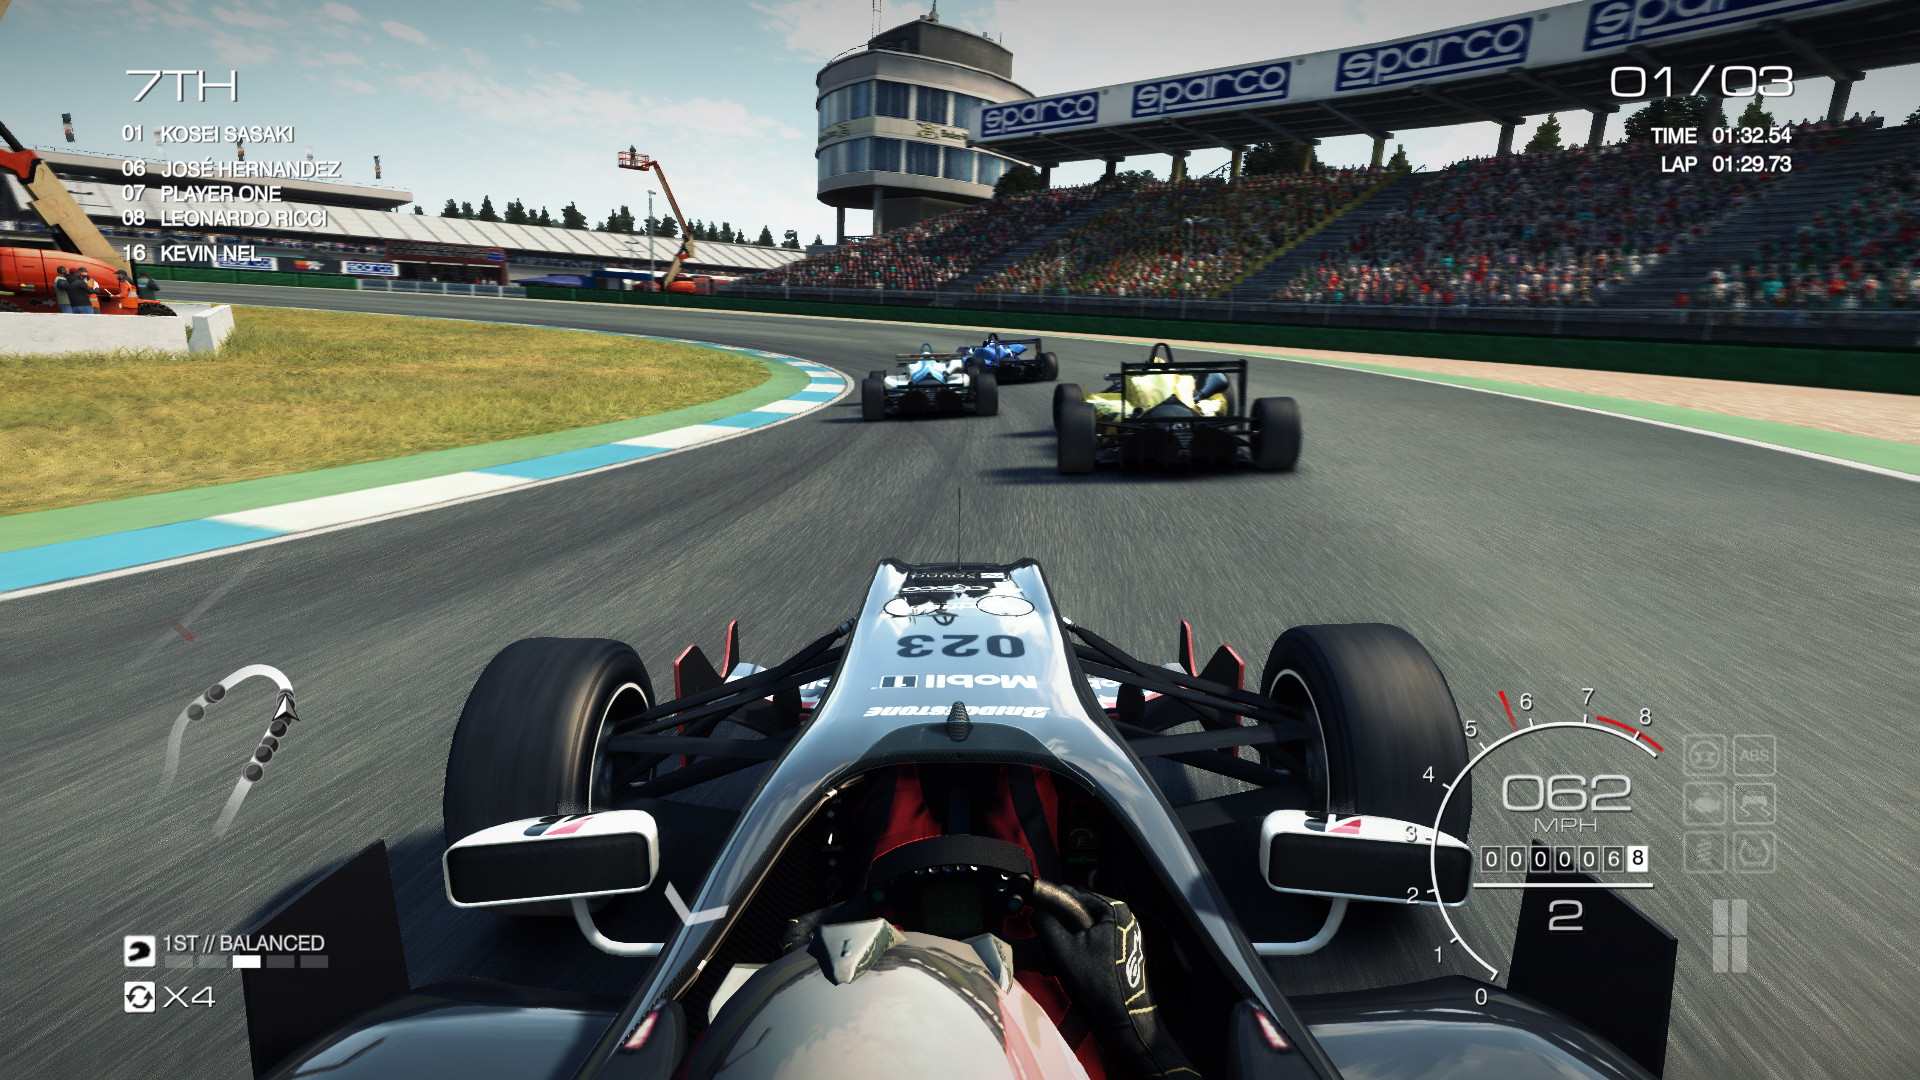 What modern racers should learn from GRID Autosport